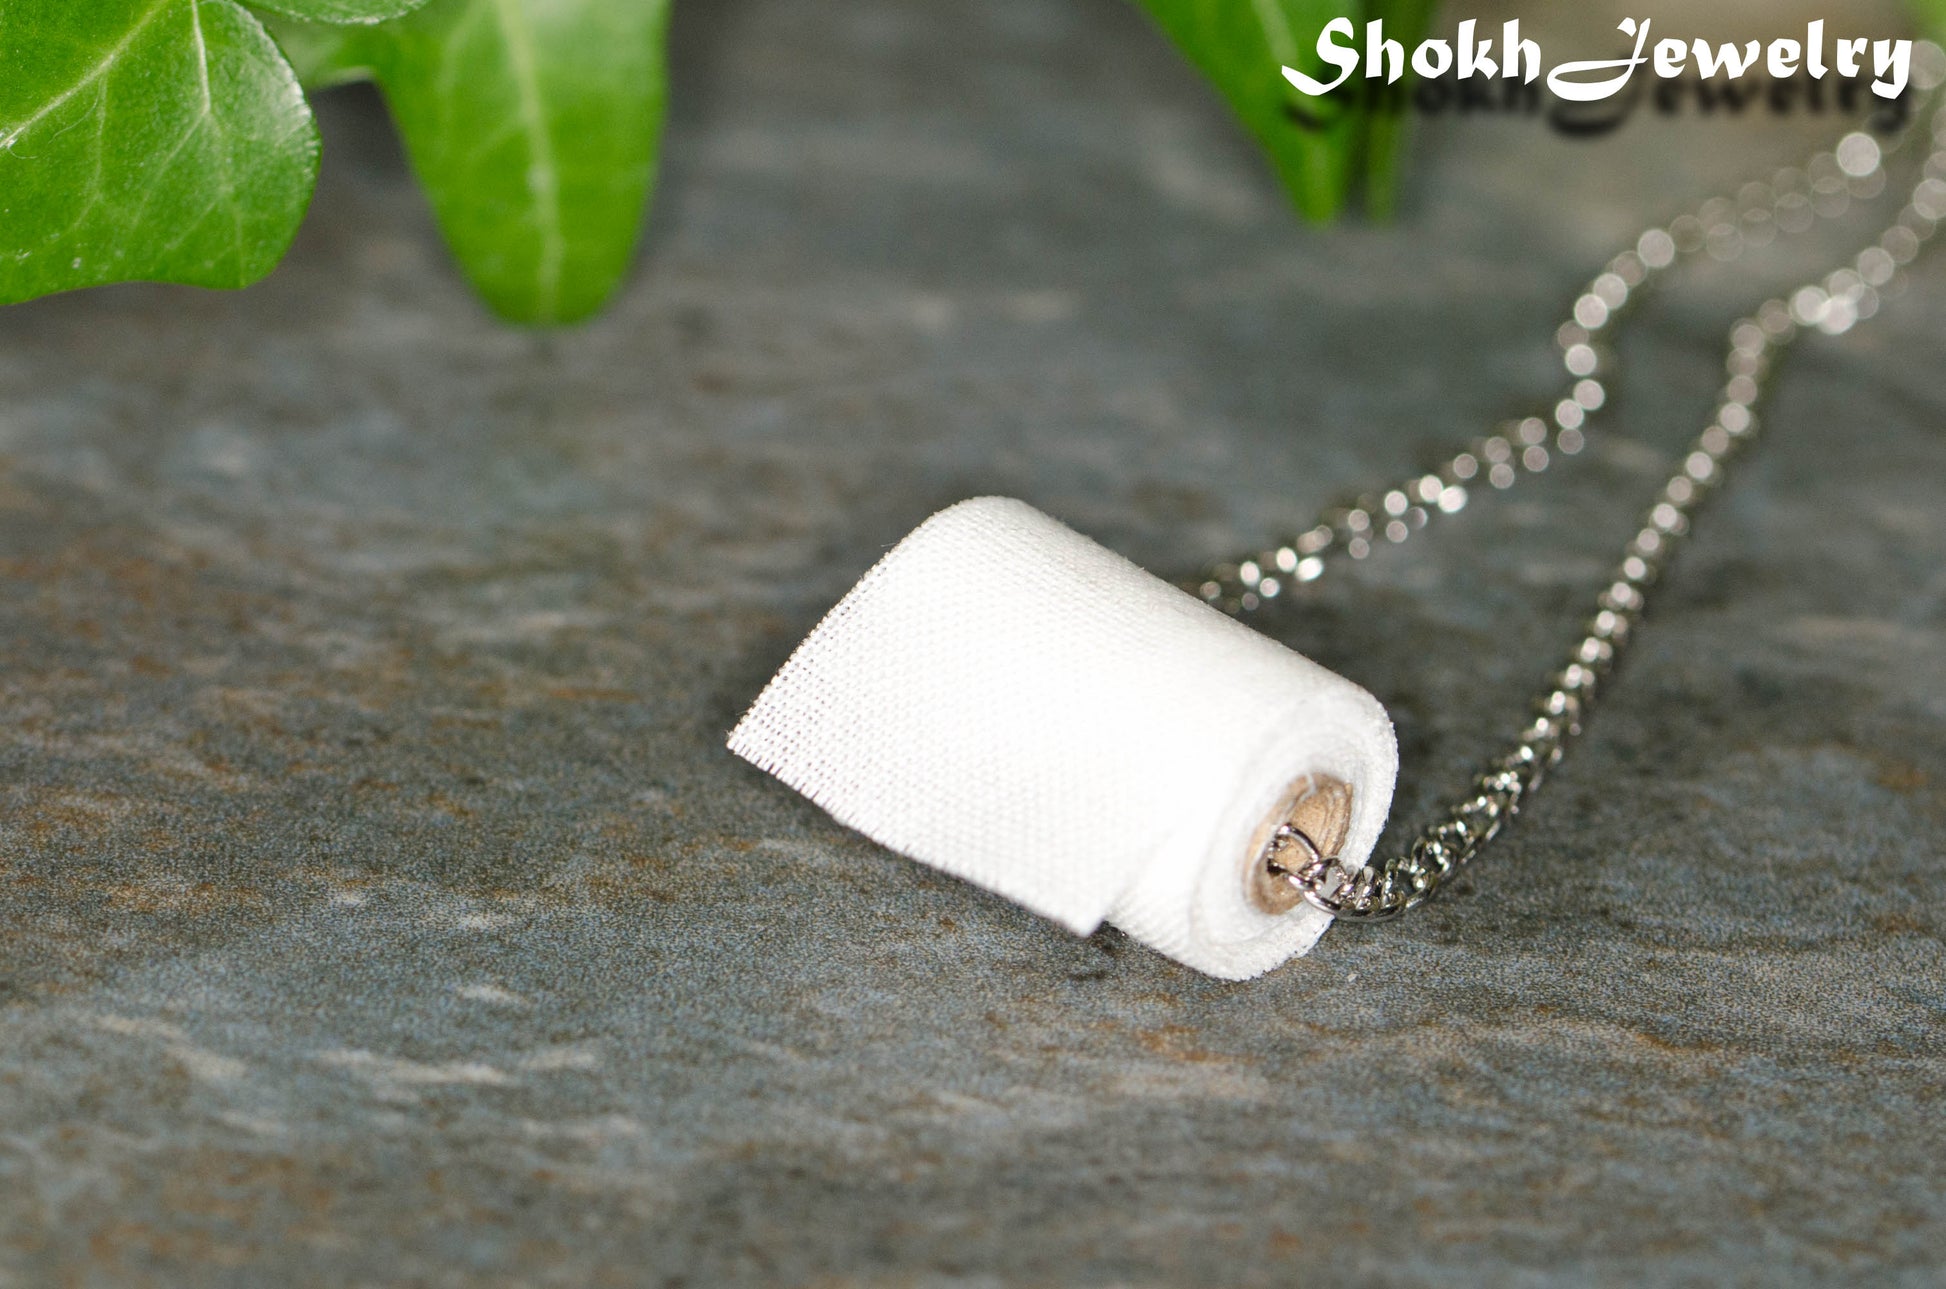 Close up of Miniature Toilet Paper Roll Necklace.